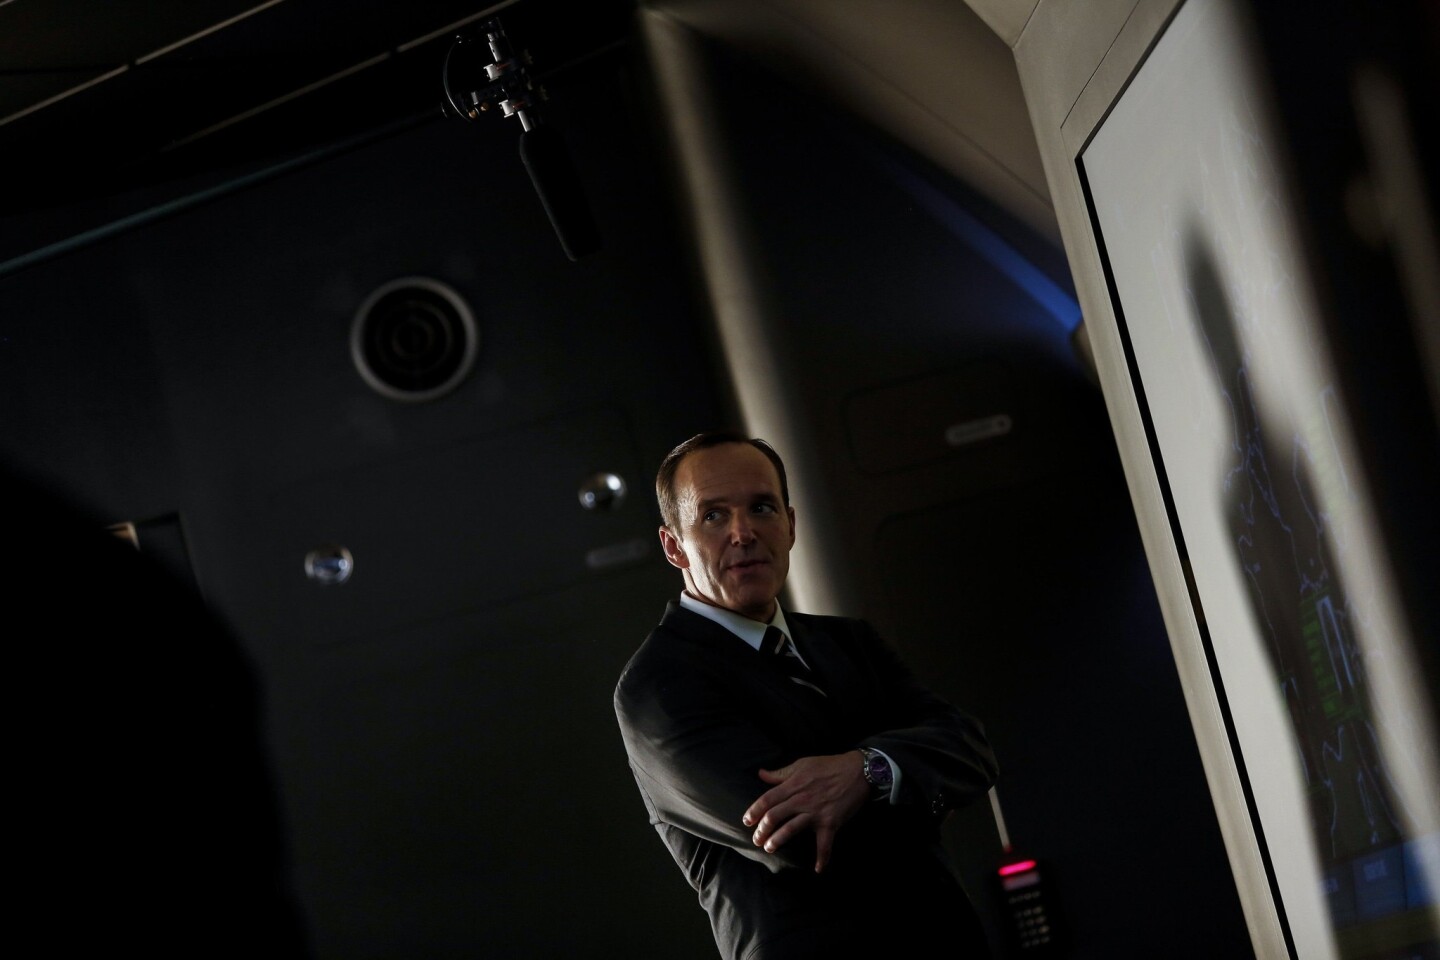 Clark Gregg as agent Phil Coulson during a scene.